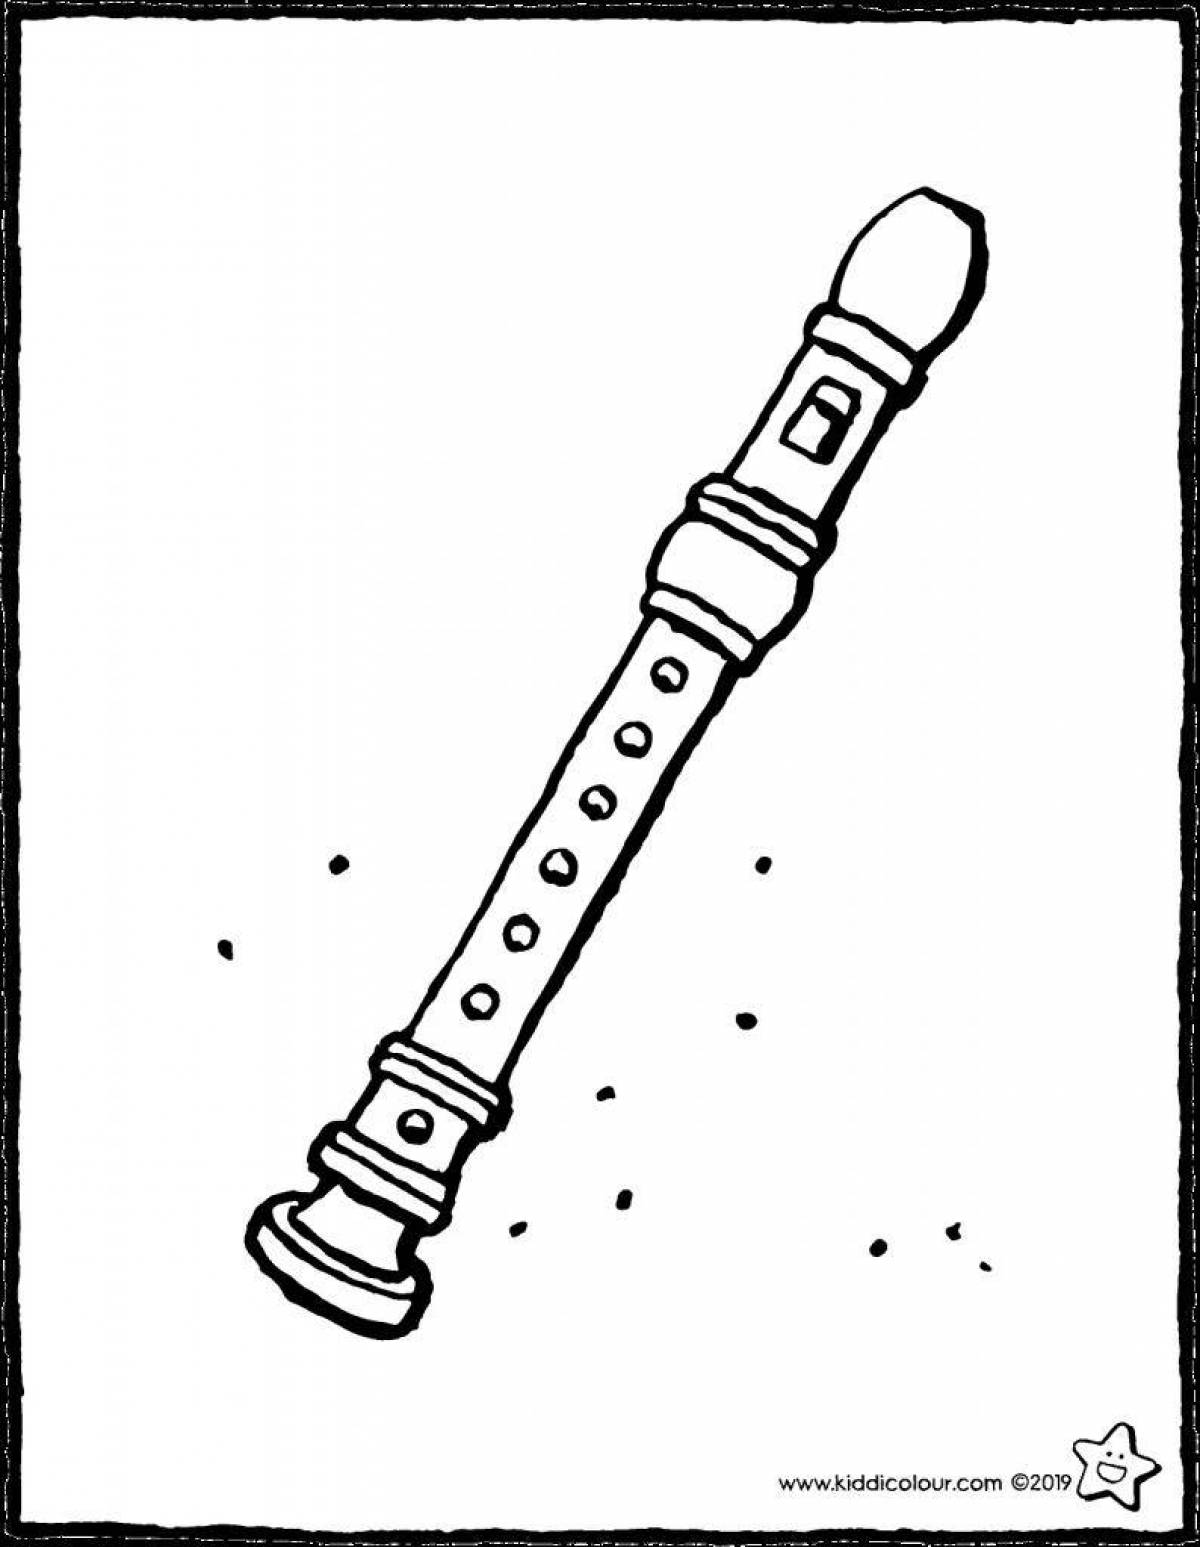 Playful flute coloring page for kids